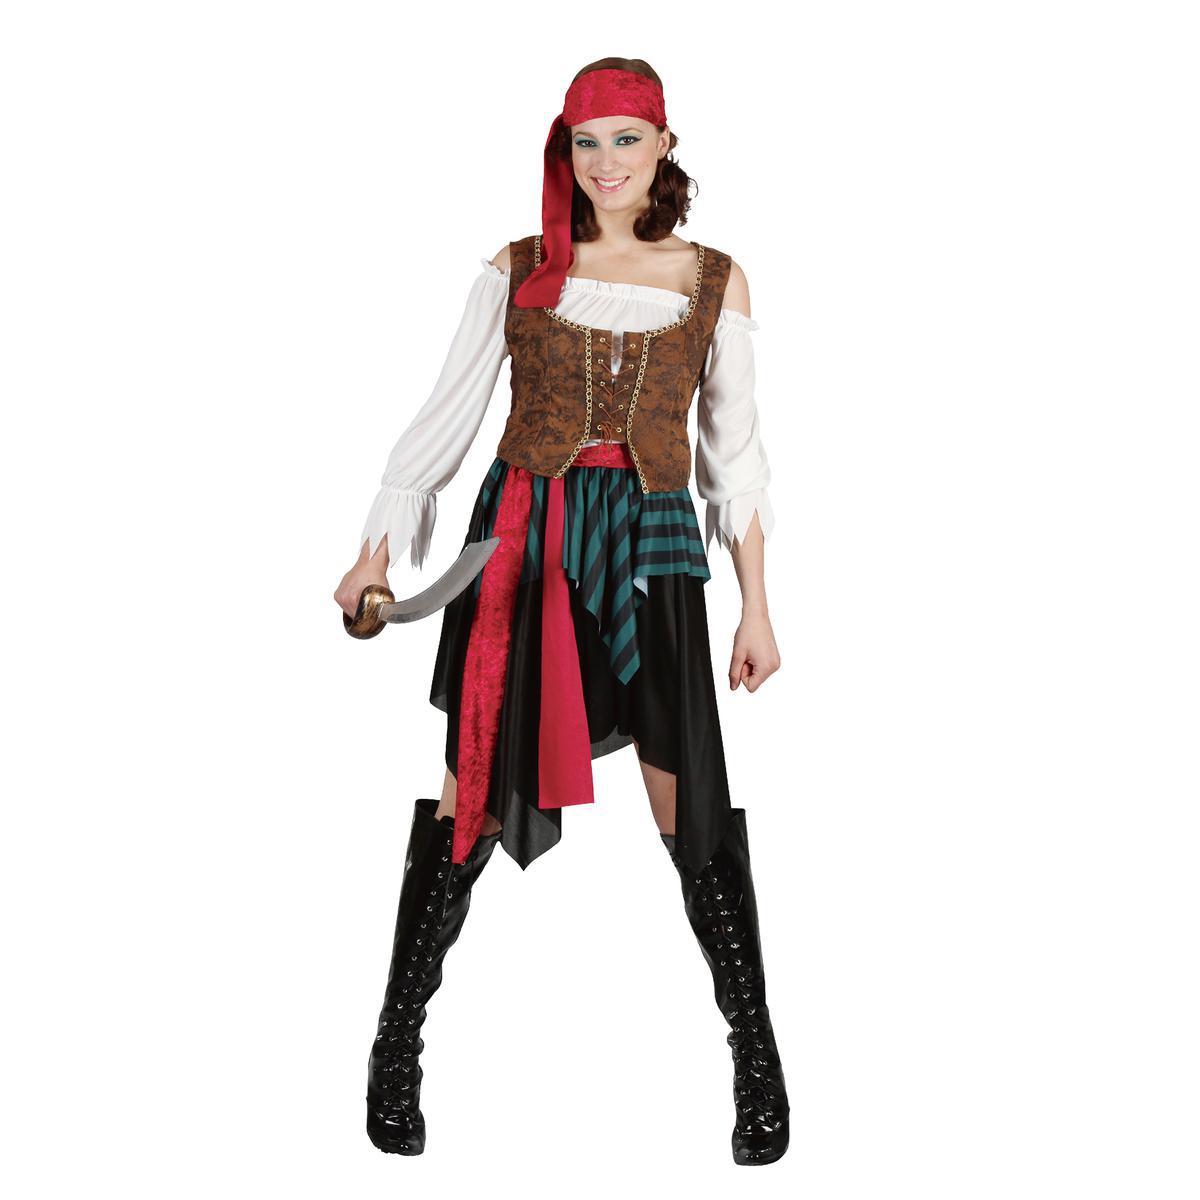 Déguisement femme pirate - Polyester - Taille adulte - Multicolore